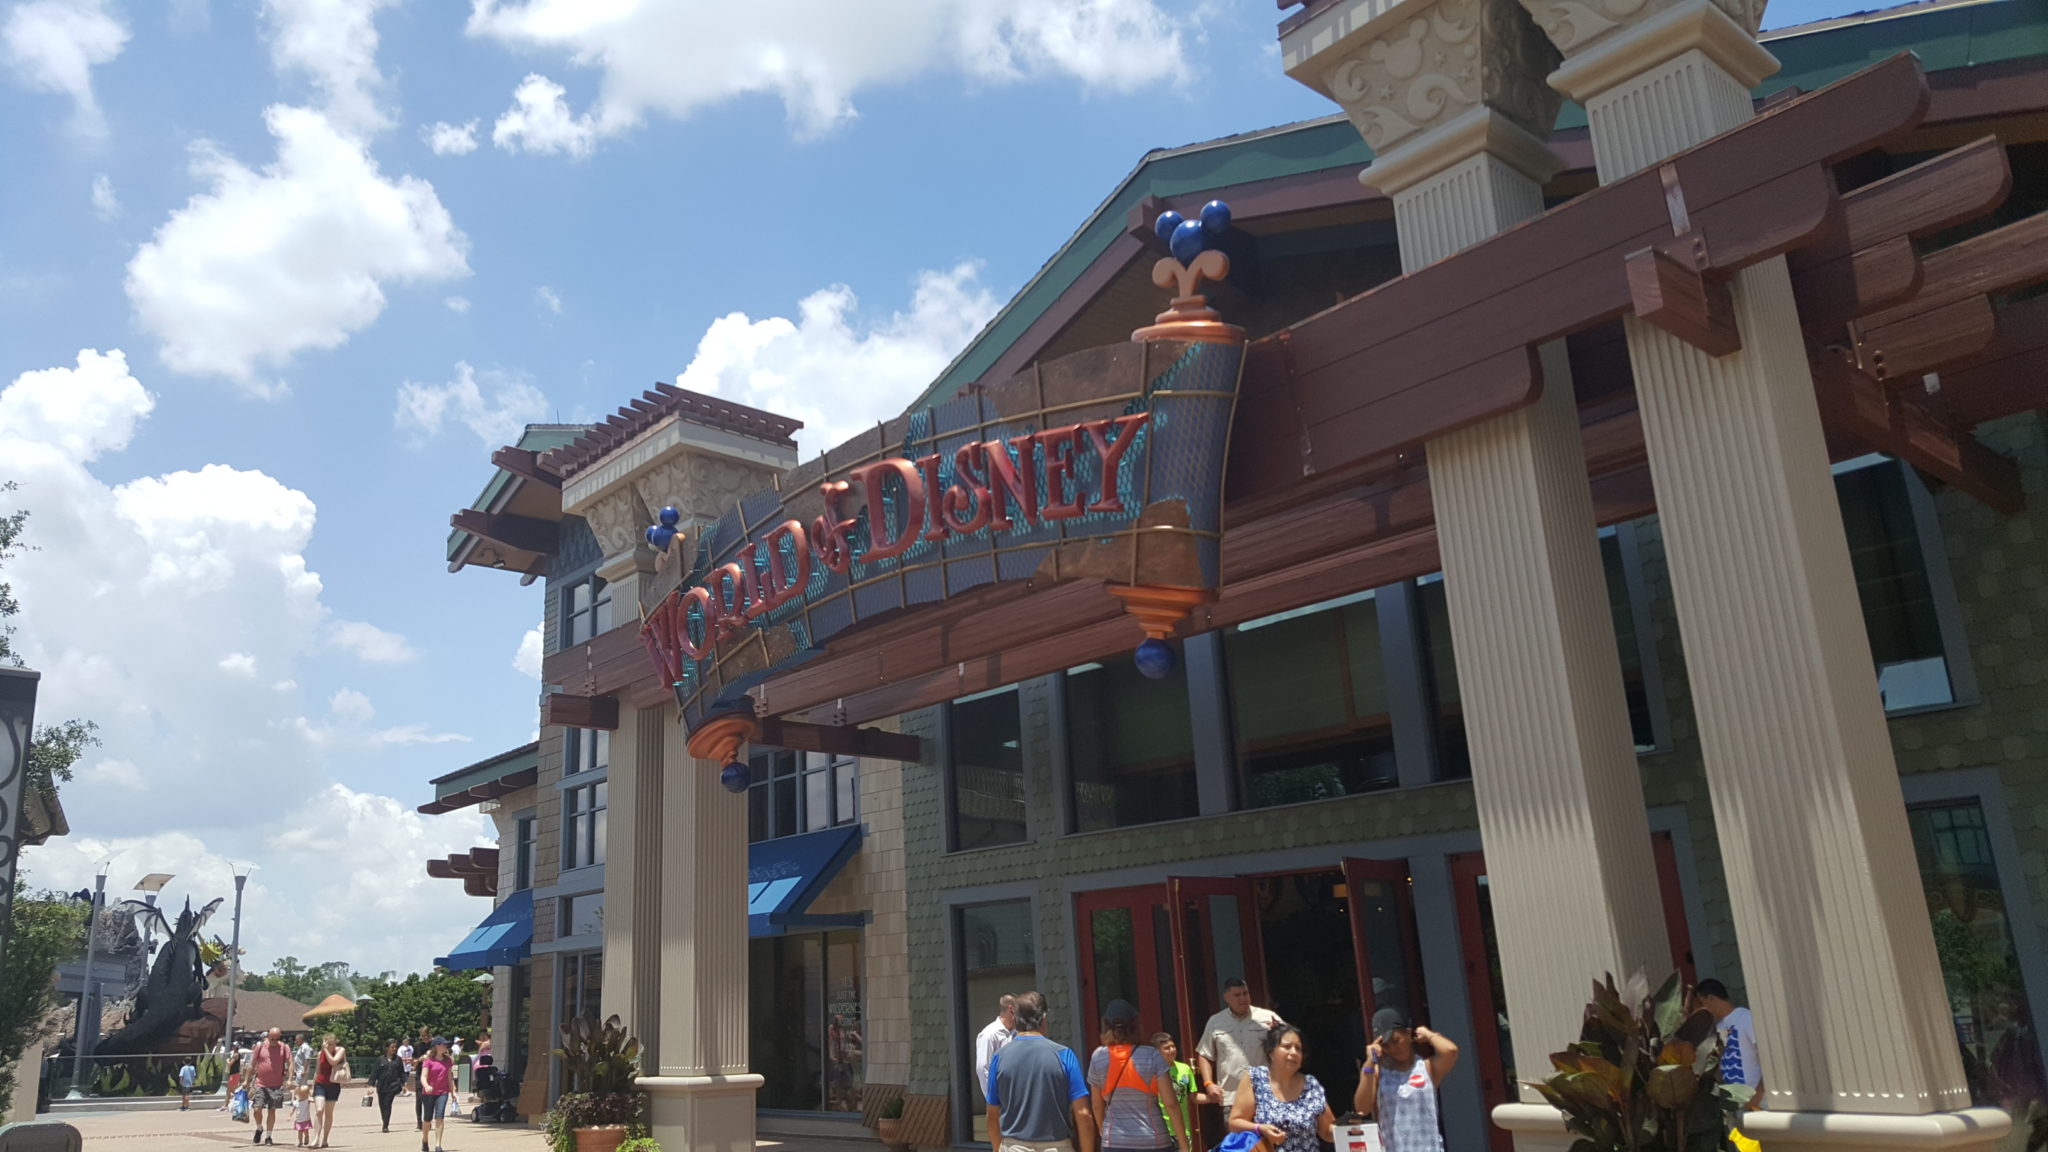 Is World of Disney in Disney Springs getting a character Meet & Greet location?